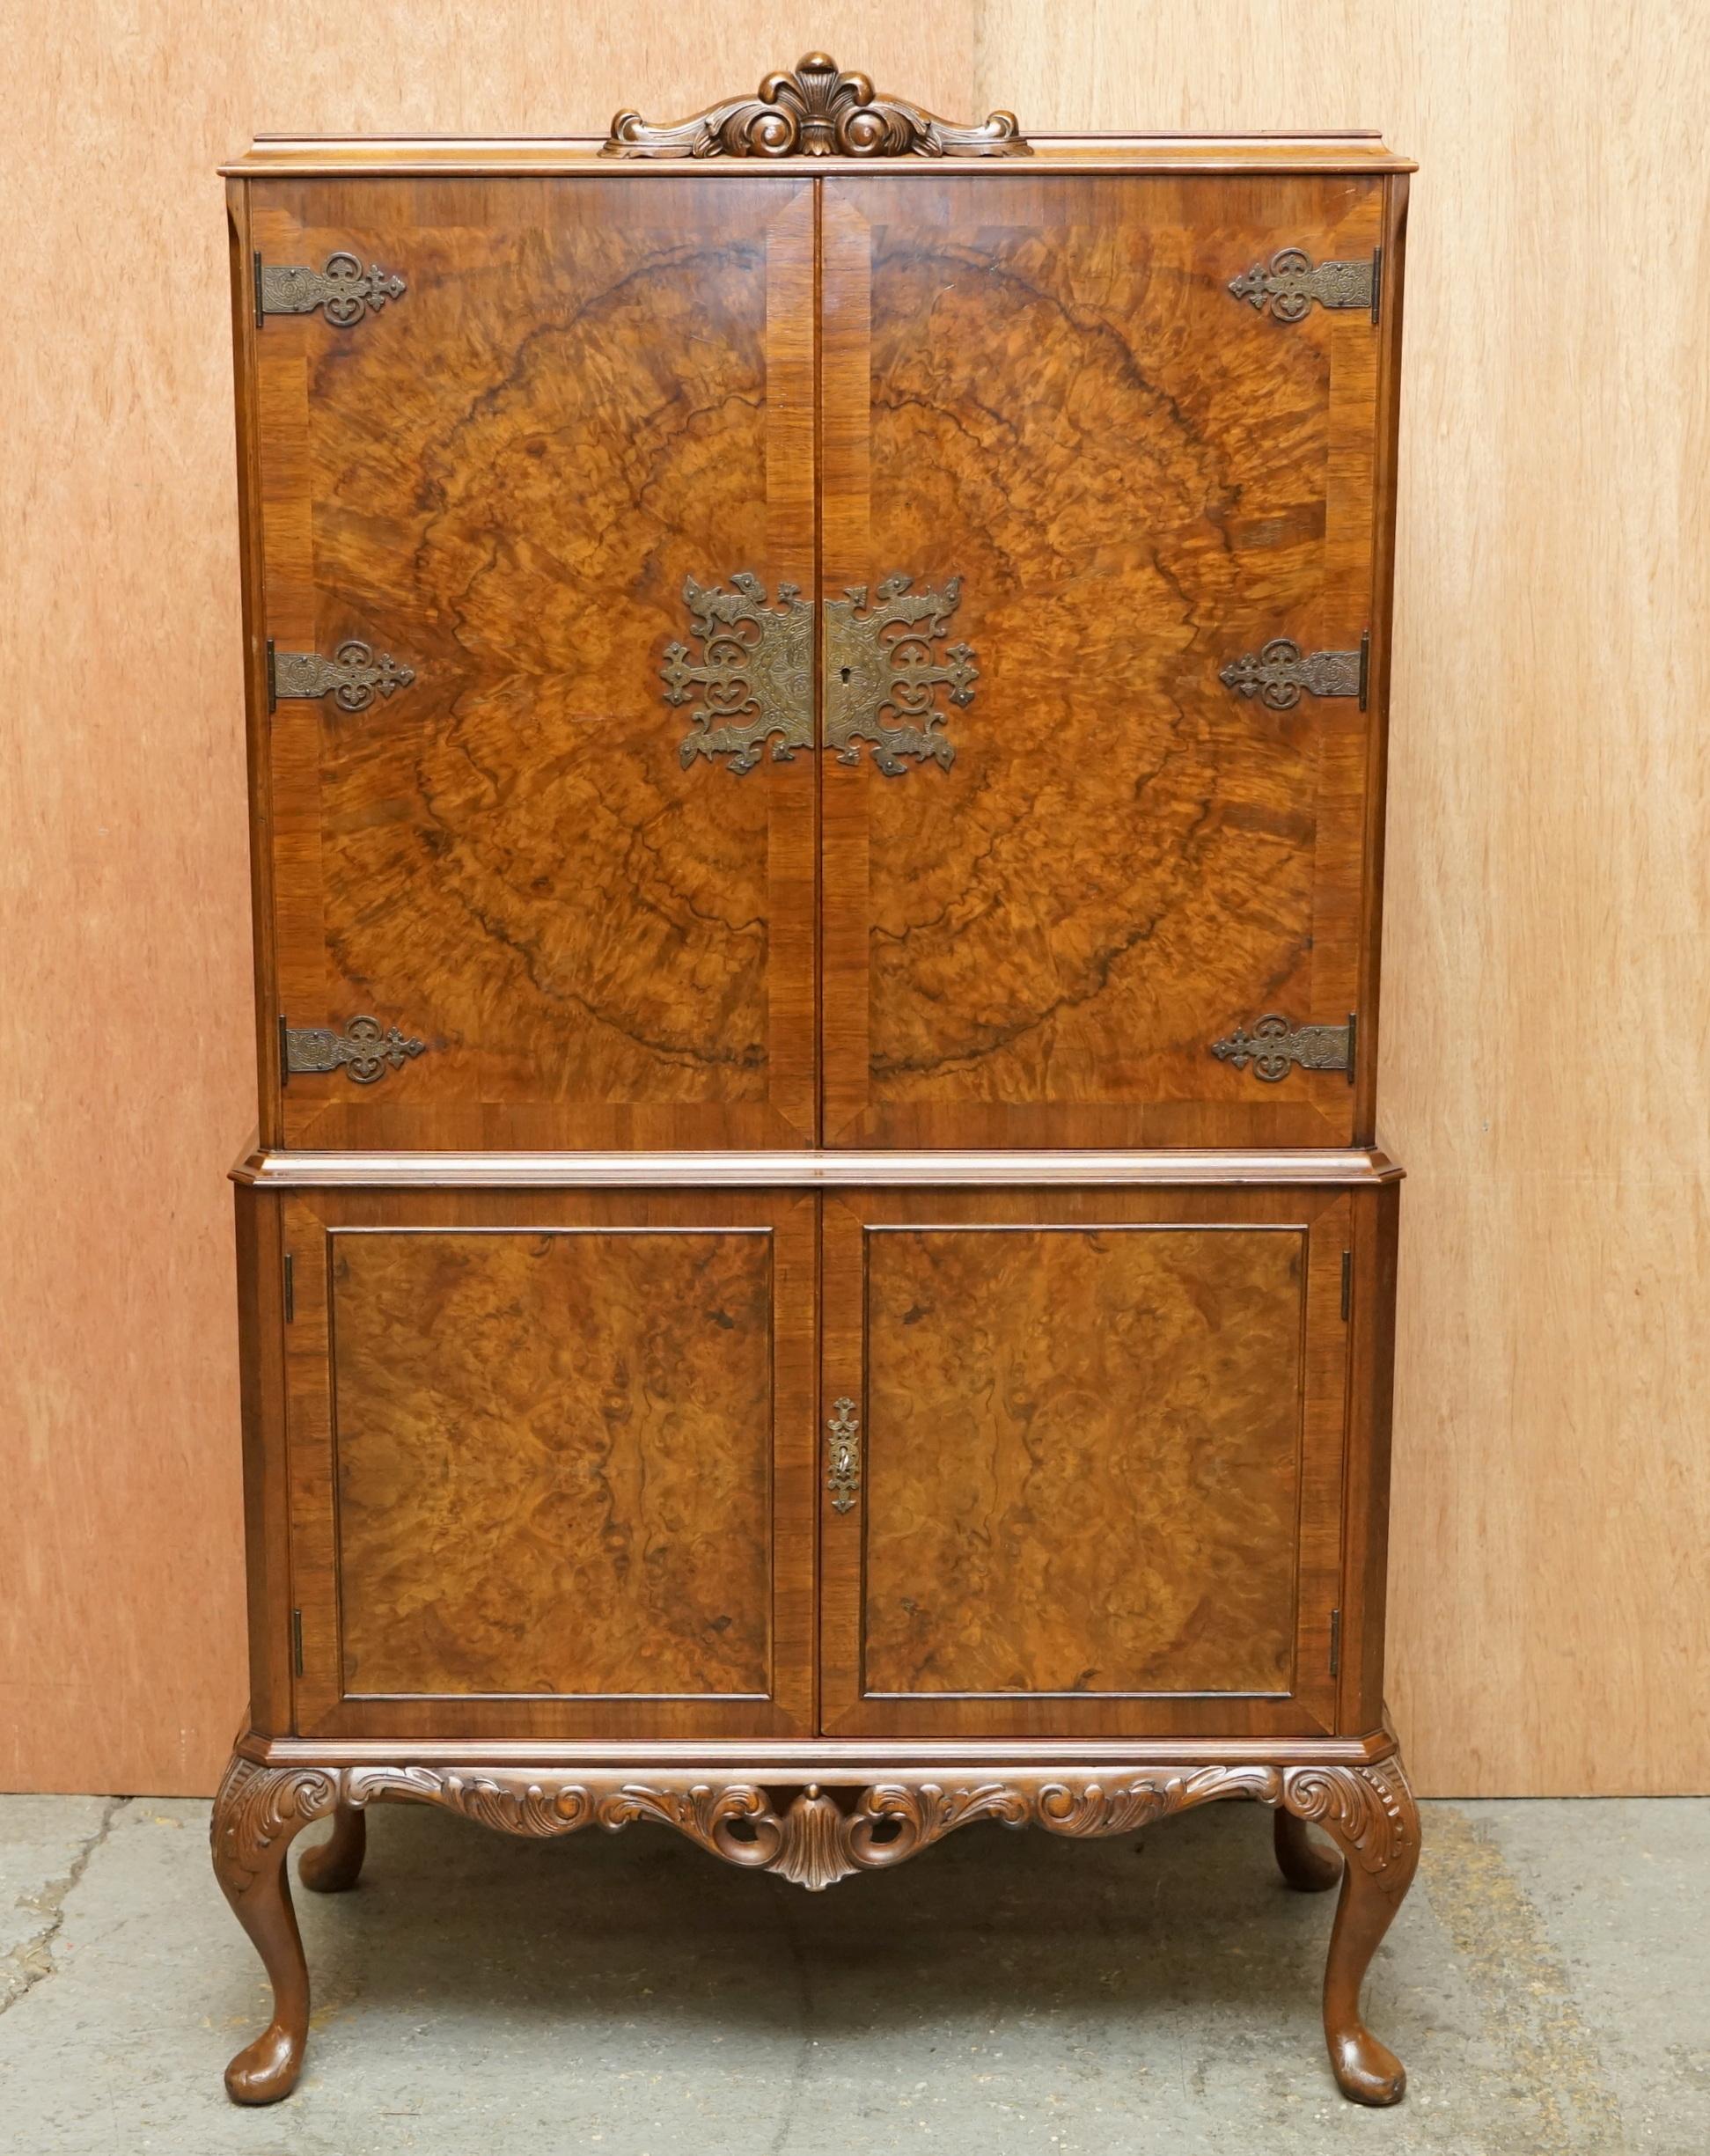 We are delighted to offer for sale this lovely antique circa 1920 Art deco Burr Walnut drinks cabinet with ornately carved cabriolet legs, mirrored back and internal lights 

A good looking and decorative piece, the timber to the front top doors